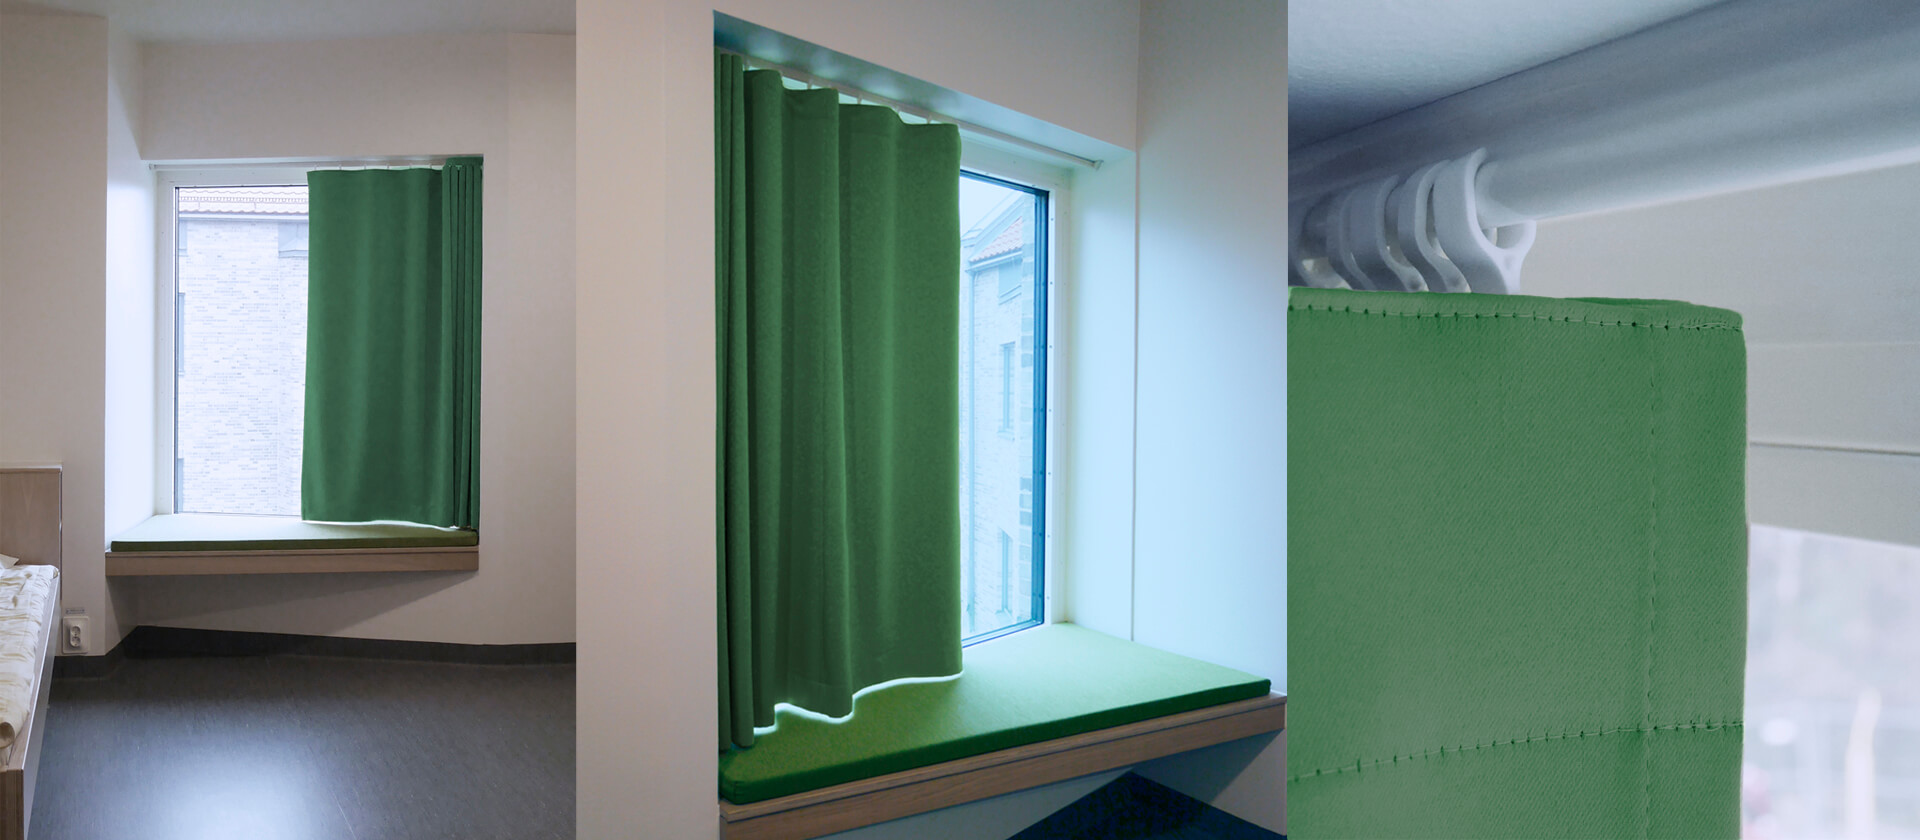 Collage with J-trac curtain rail system from a patient room